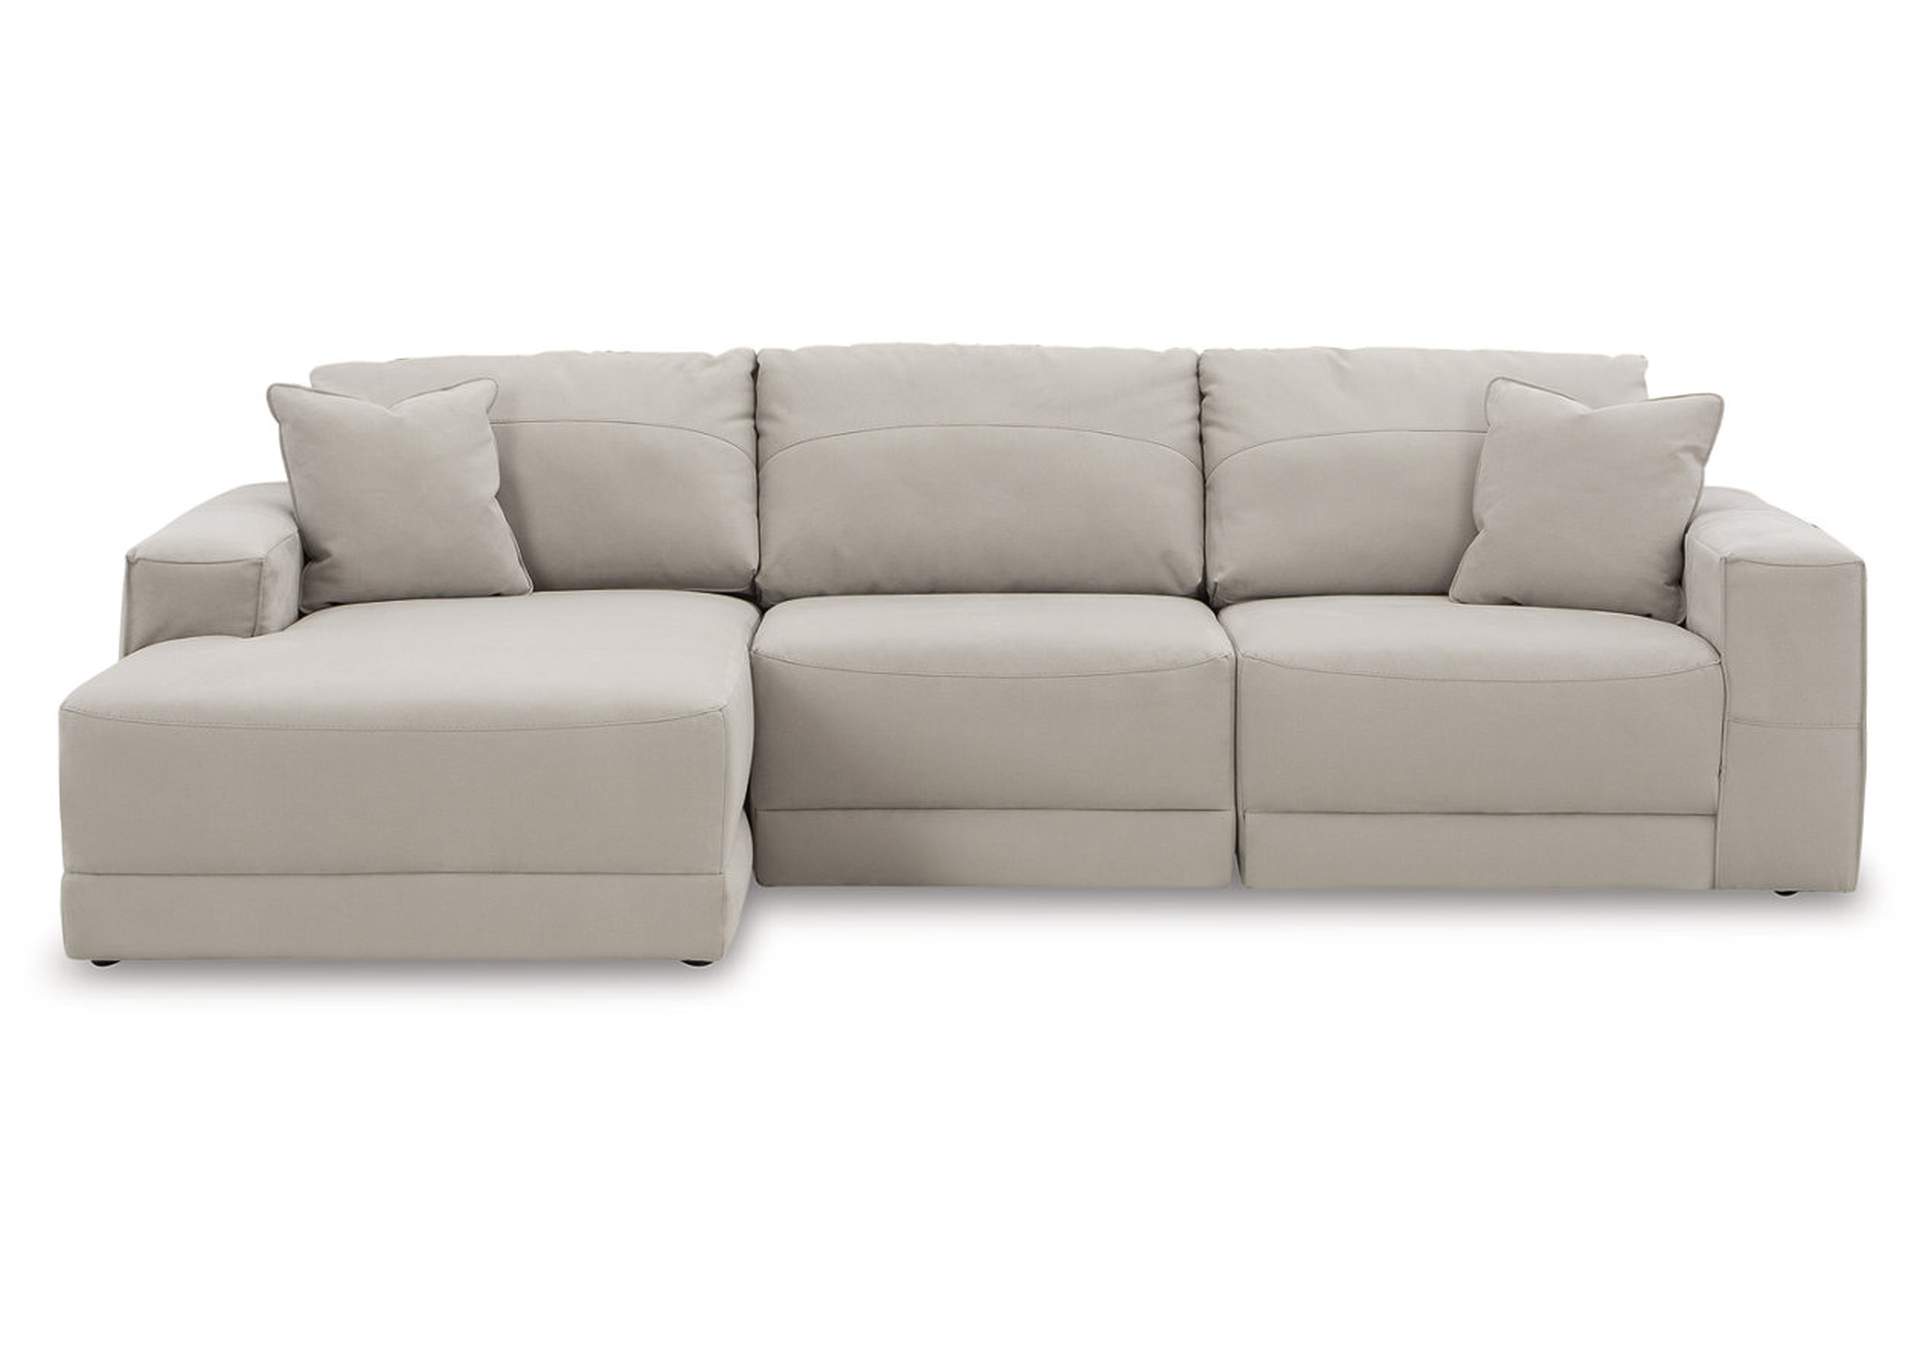 Next-Gen Gaucho 3-Piece Sectional Sofa with Chaise,Benchcraft